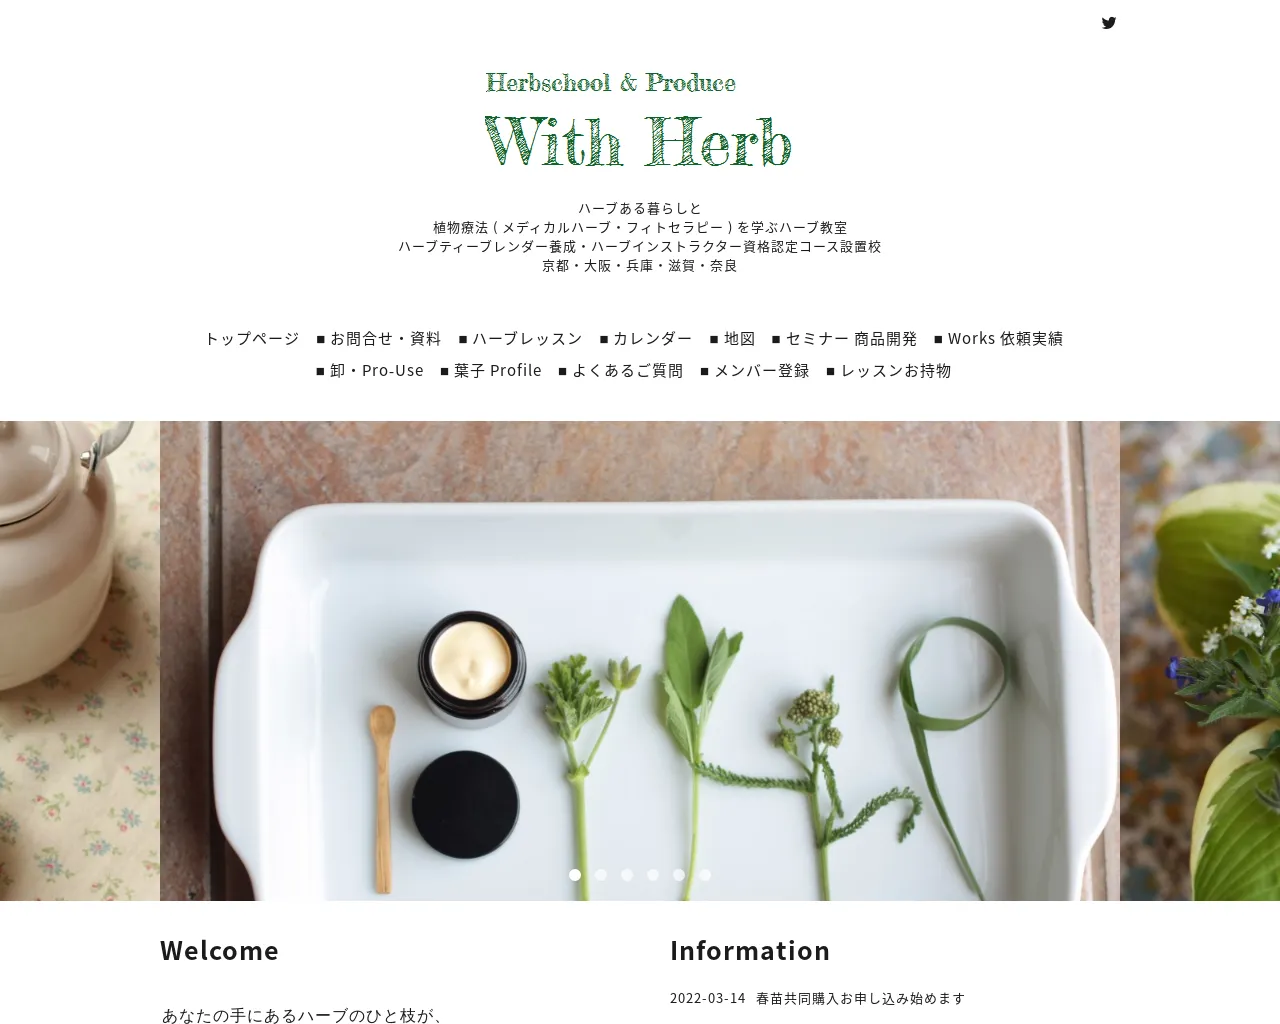 Herbschool & Produce With Herb（ウィズ ハーブ） site